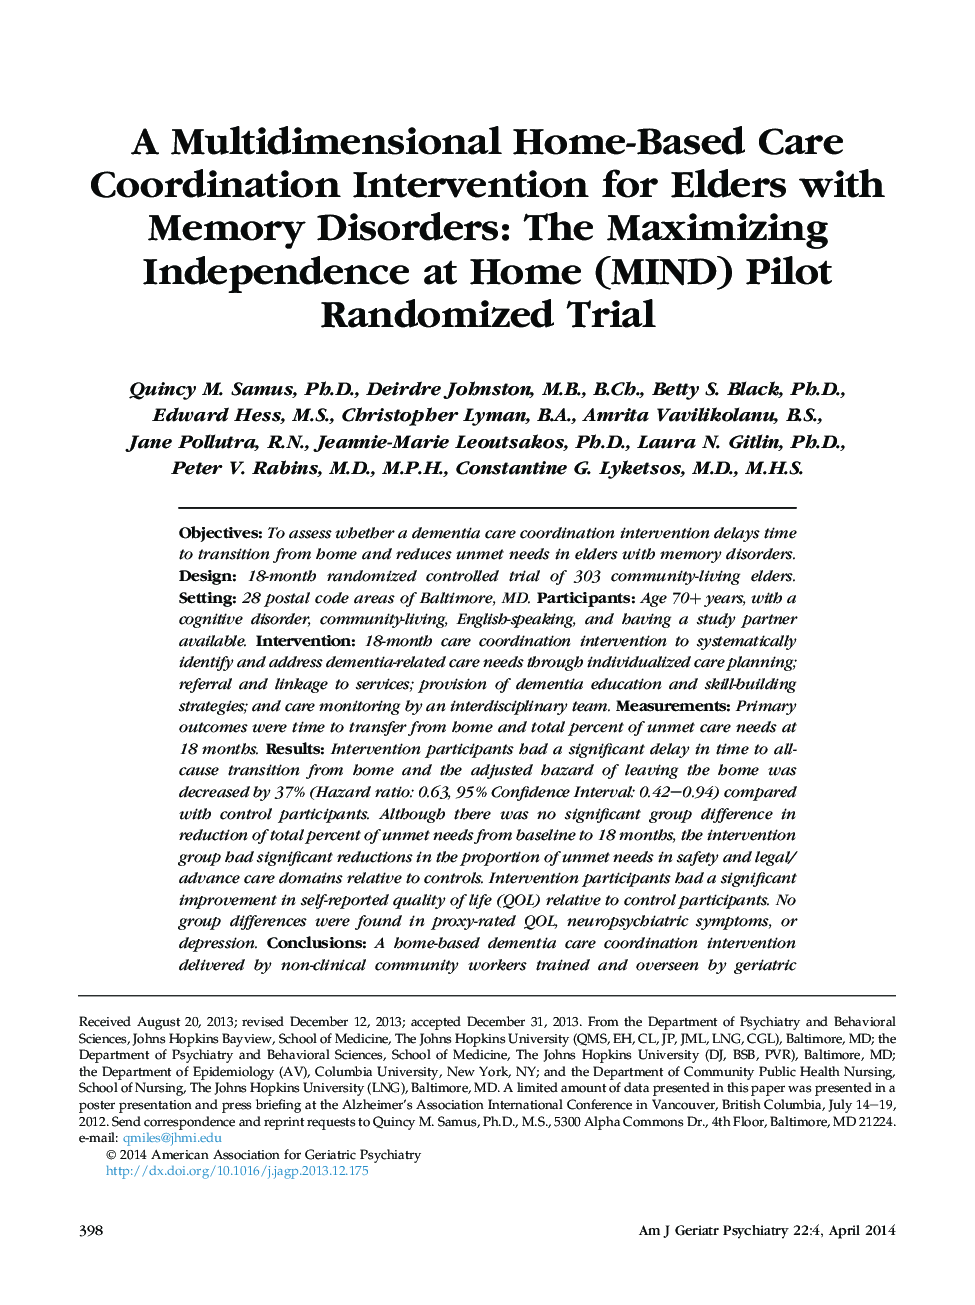 A Multidimensional Home-Based Care Coordination Intervention for Elders with Memory Disorders: The Maximizing Independence at Home (MIND) Pilot Randomized Trial